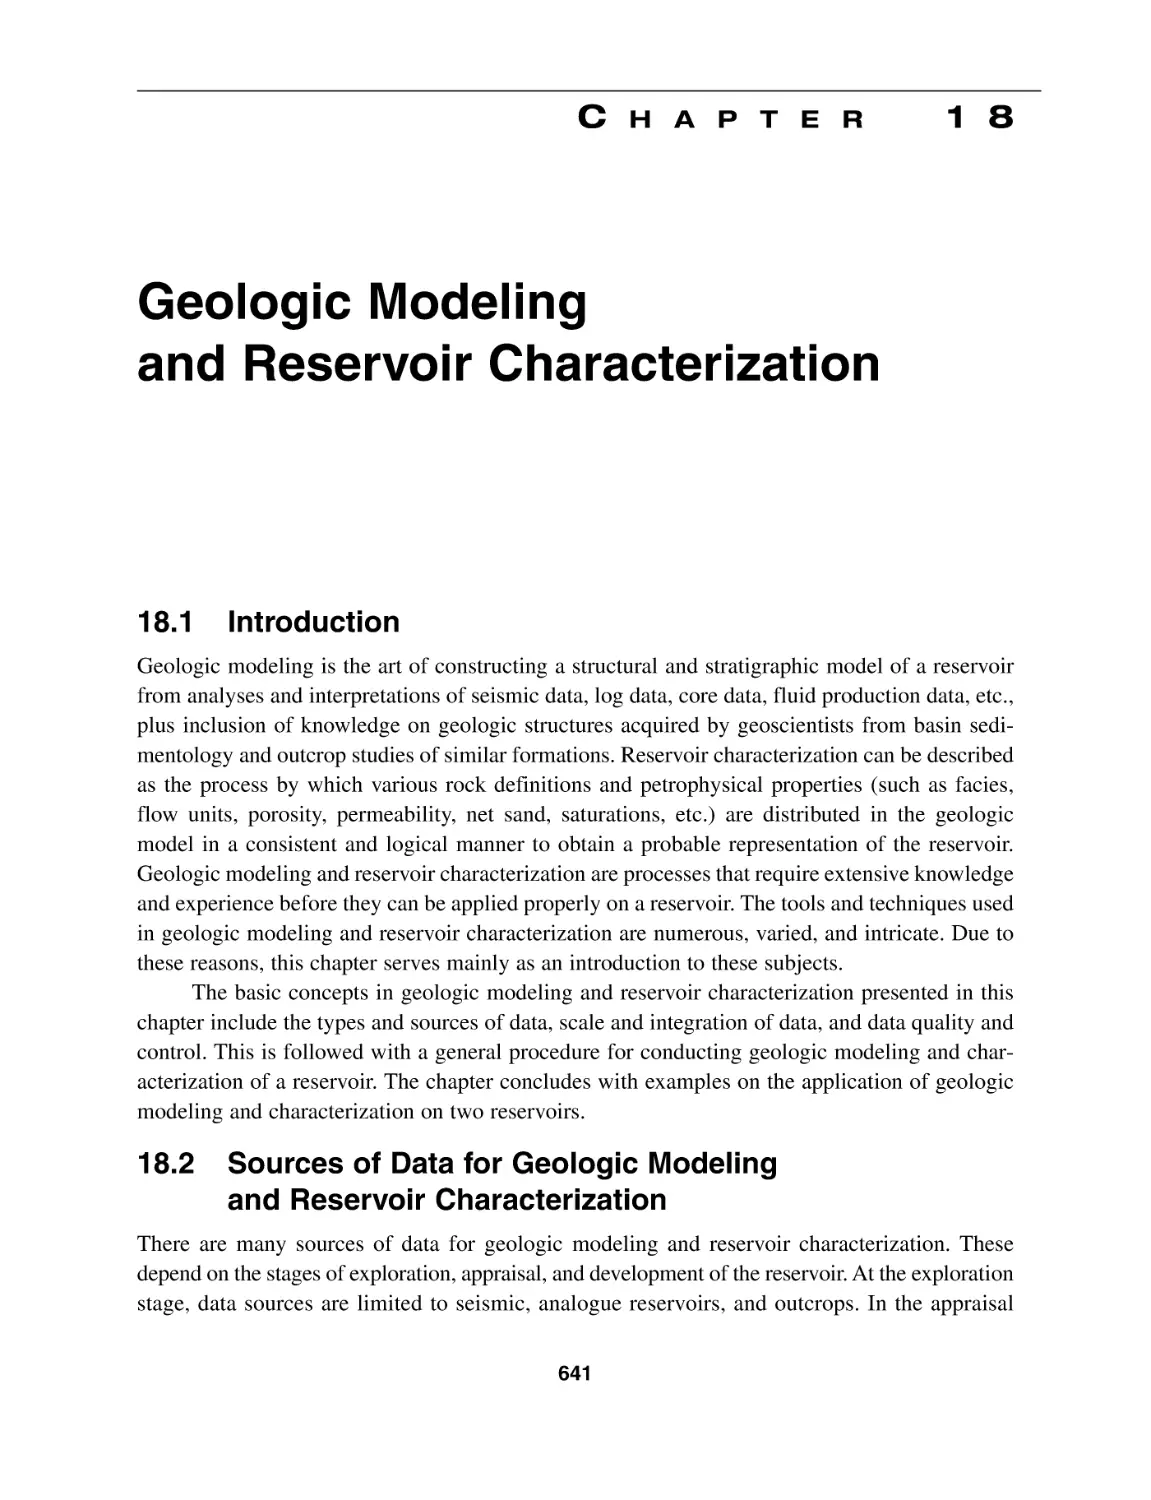 Chapter 18 Geologic Modeling and Reservoir Characterization
18.1 Introduction
18.2 Sources of Data for Geologic Modeling and Reservoir Characterization